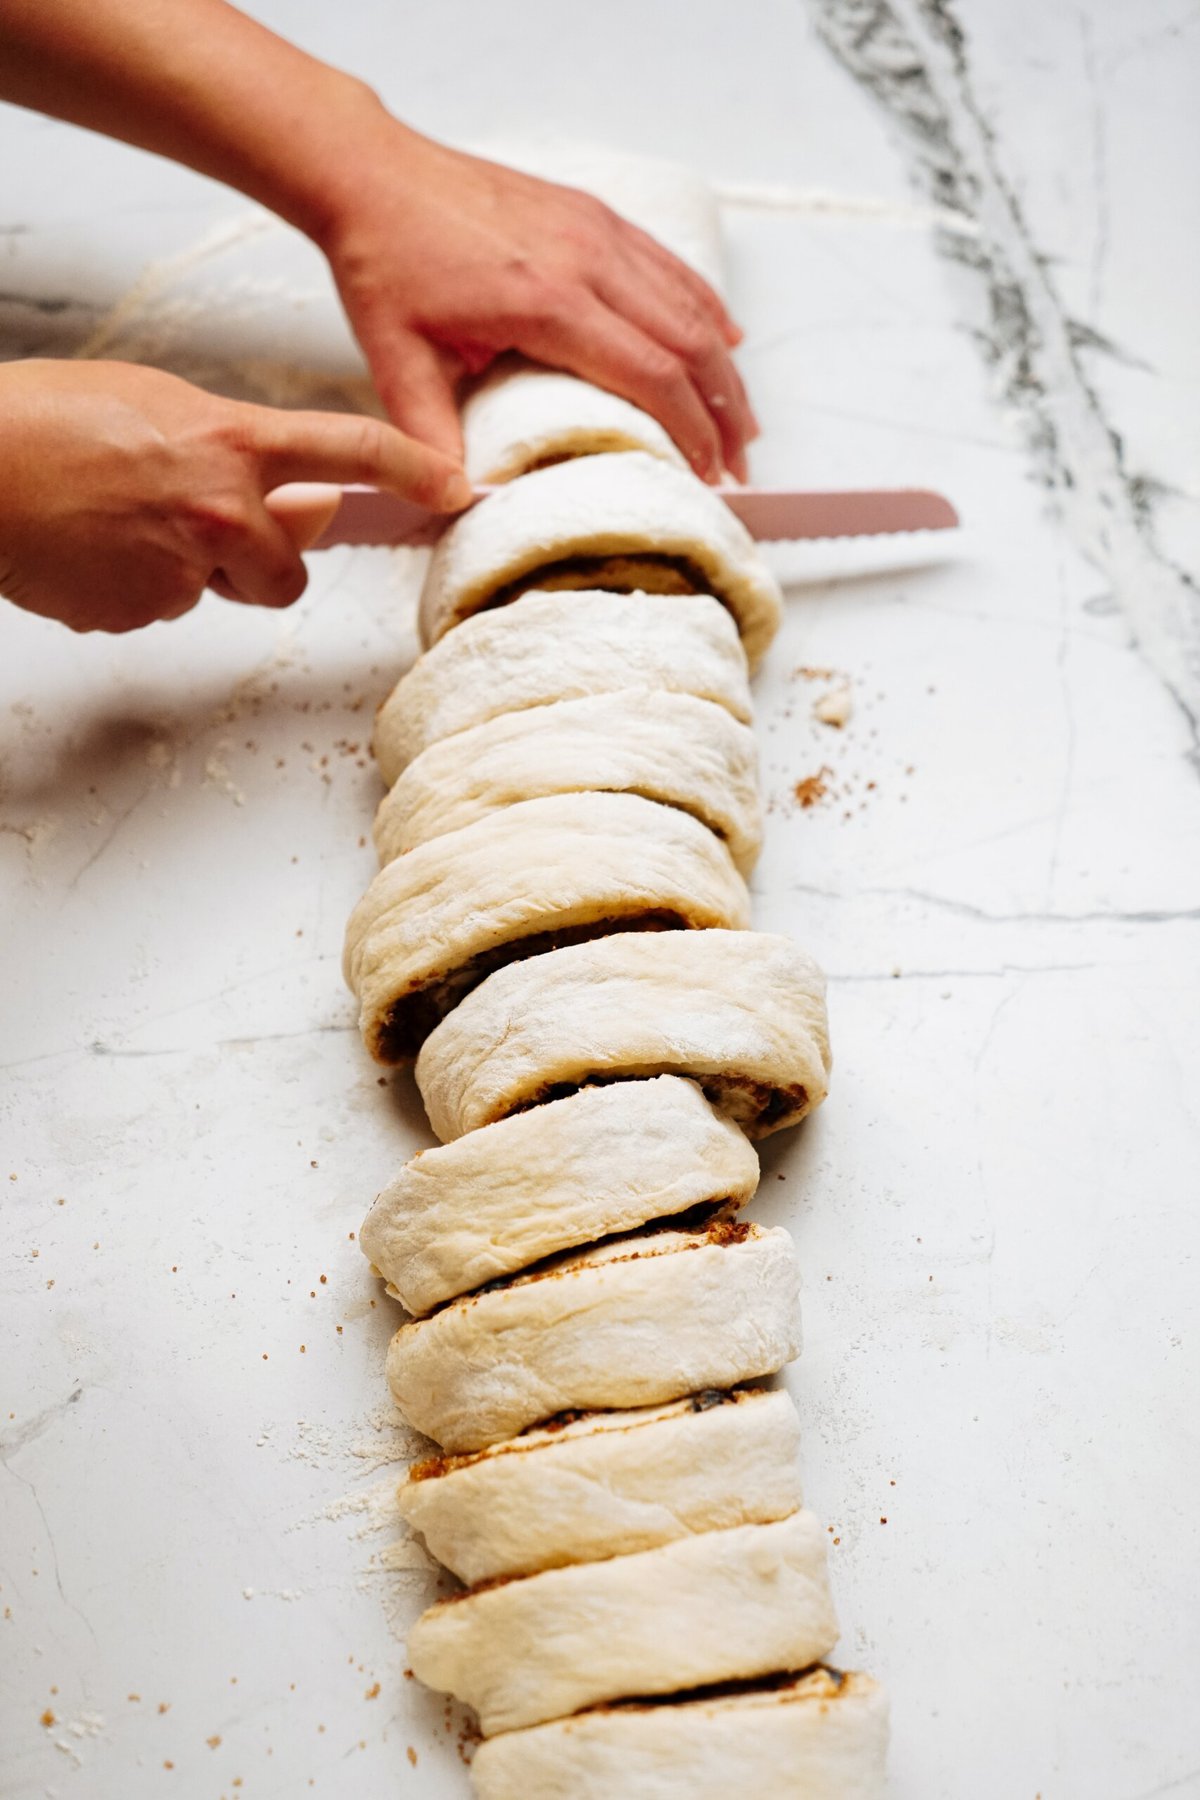 Hands cutting rolled dough with a serrated knife into even portions on a white marble surface, preparing delicious cinnamon rolls.